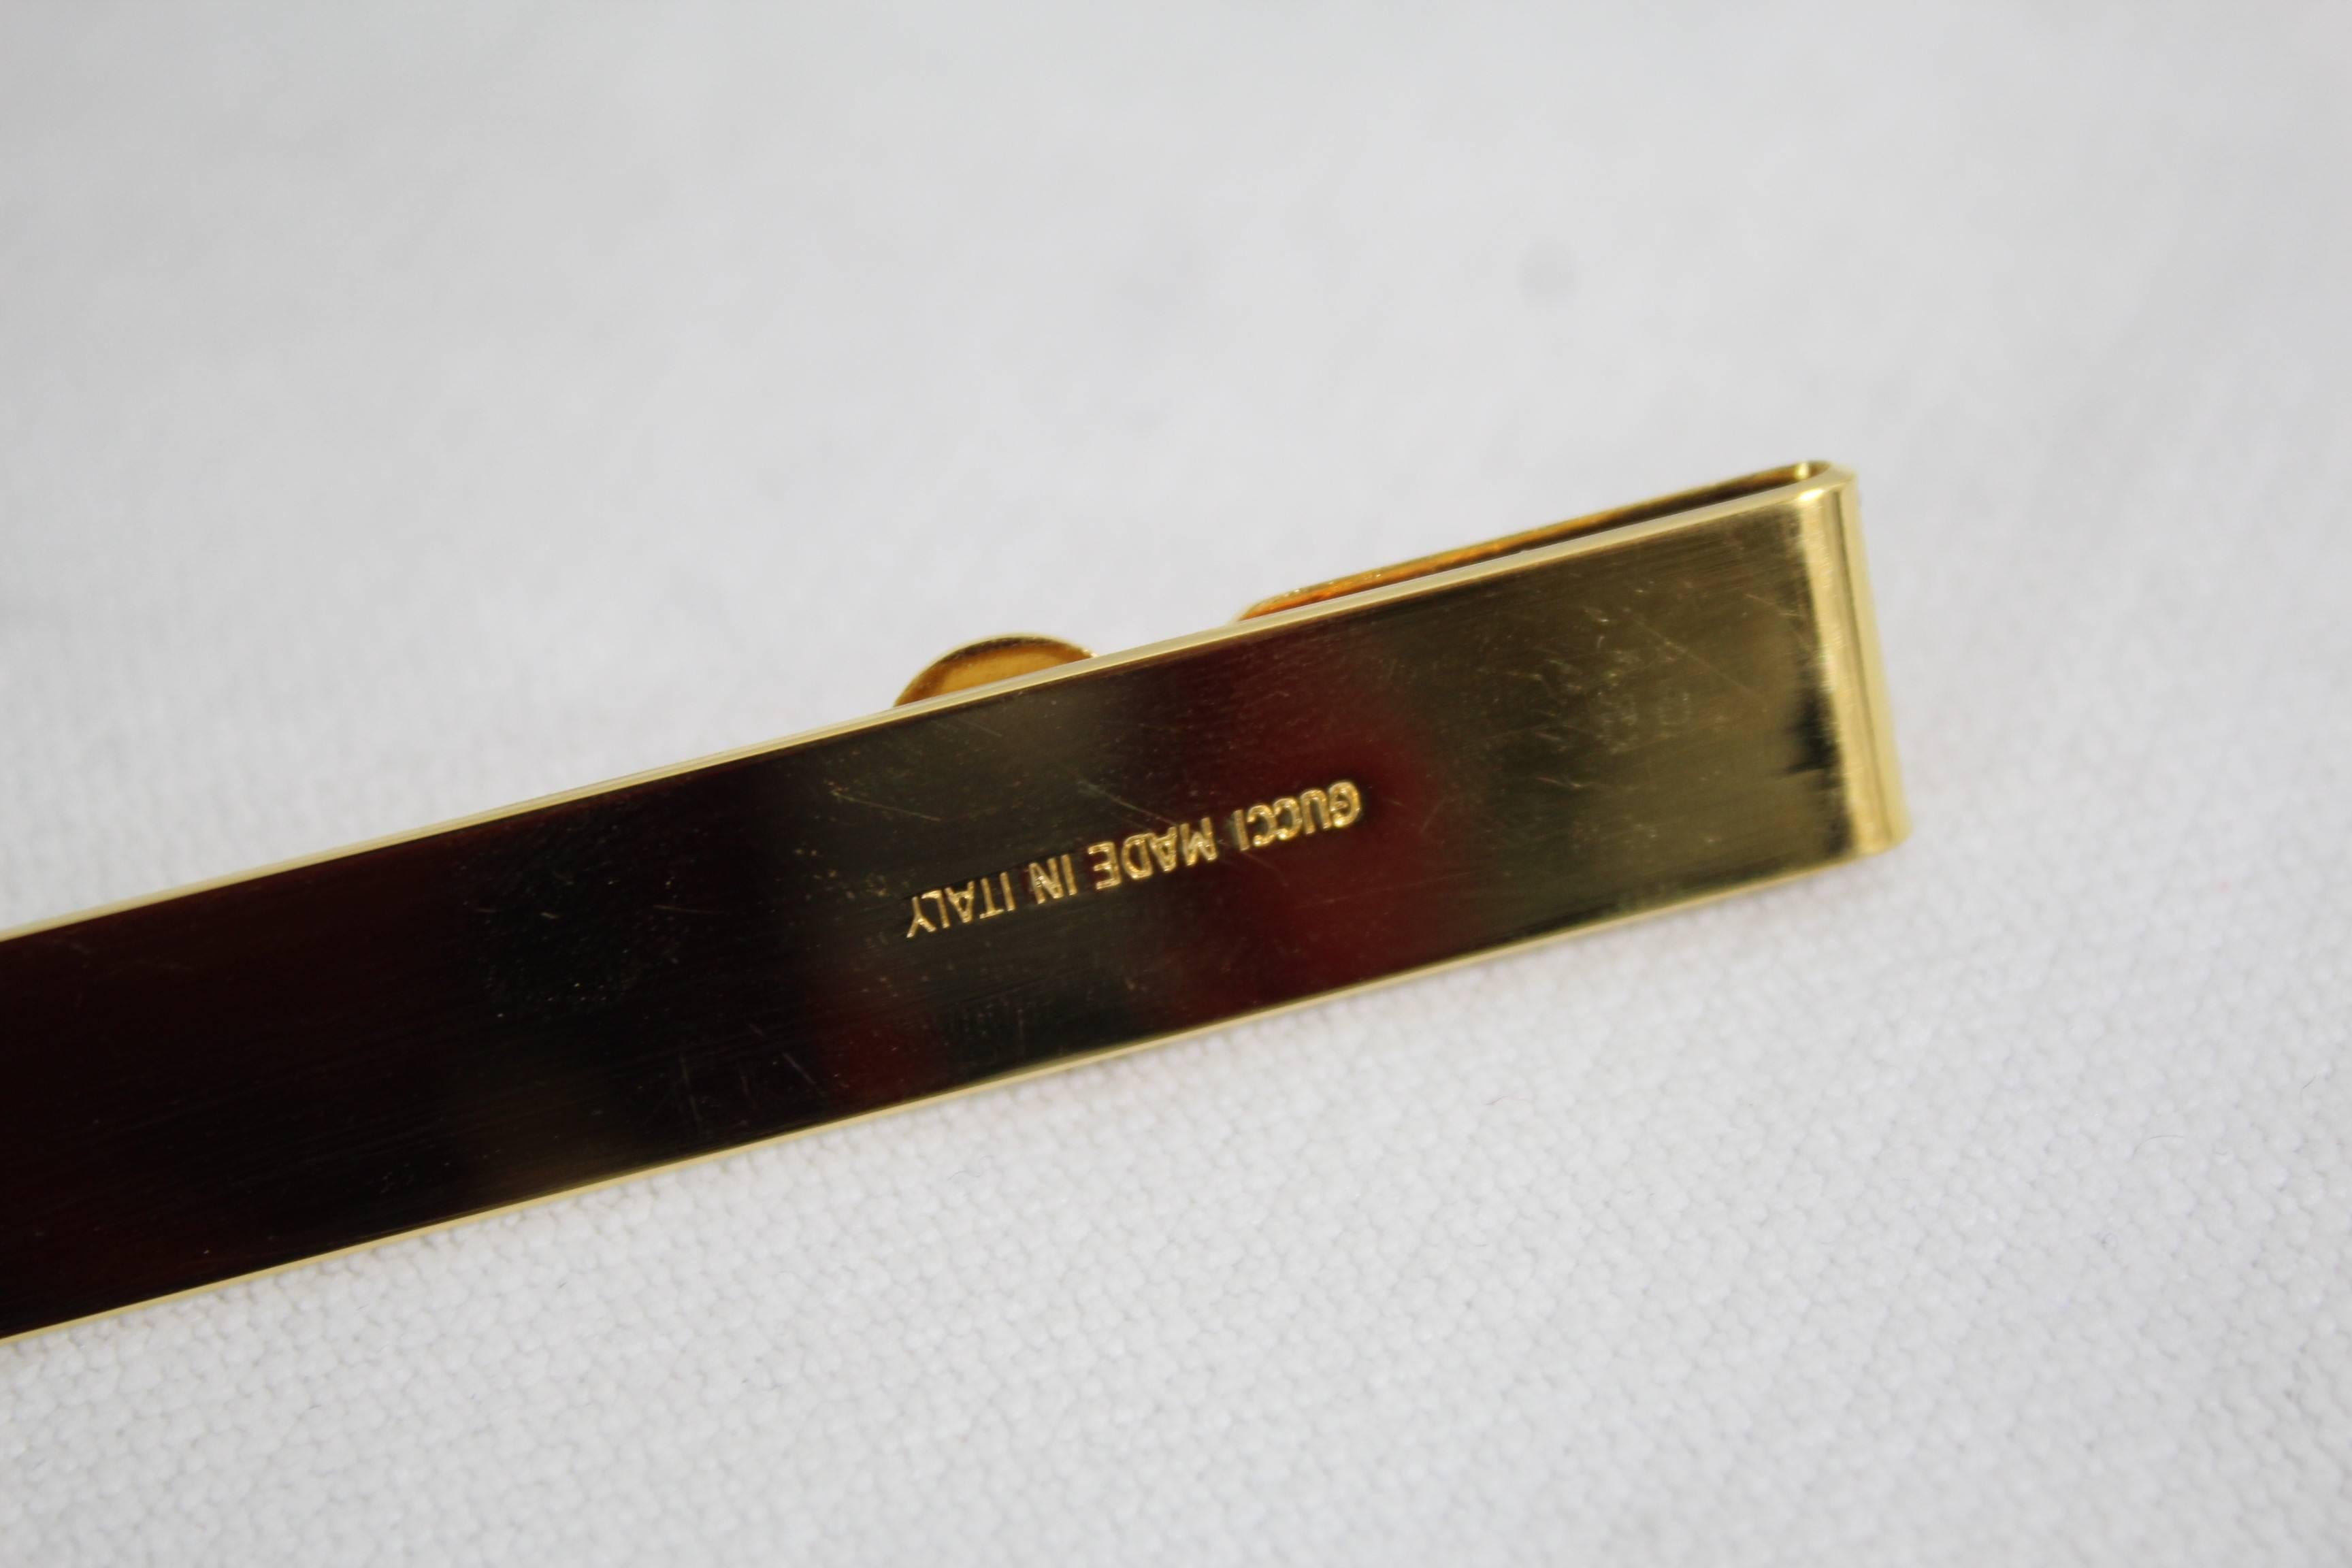 Vinatge Gold Plated Gucci Book mark / letter opener in excellent condition.

Coming with its lzard pouch.

Signed in the back